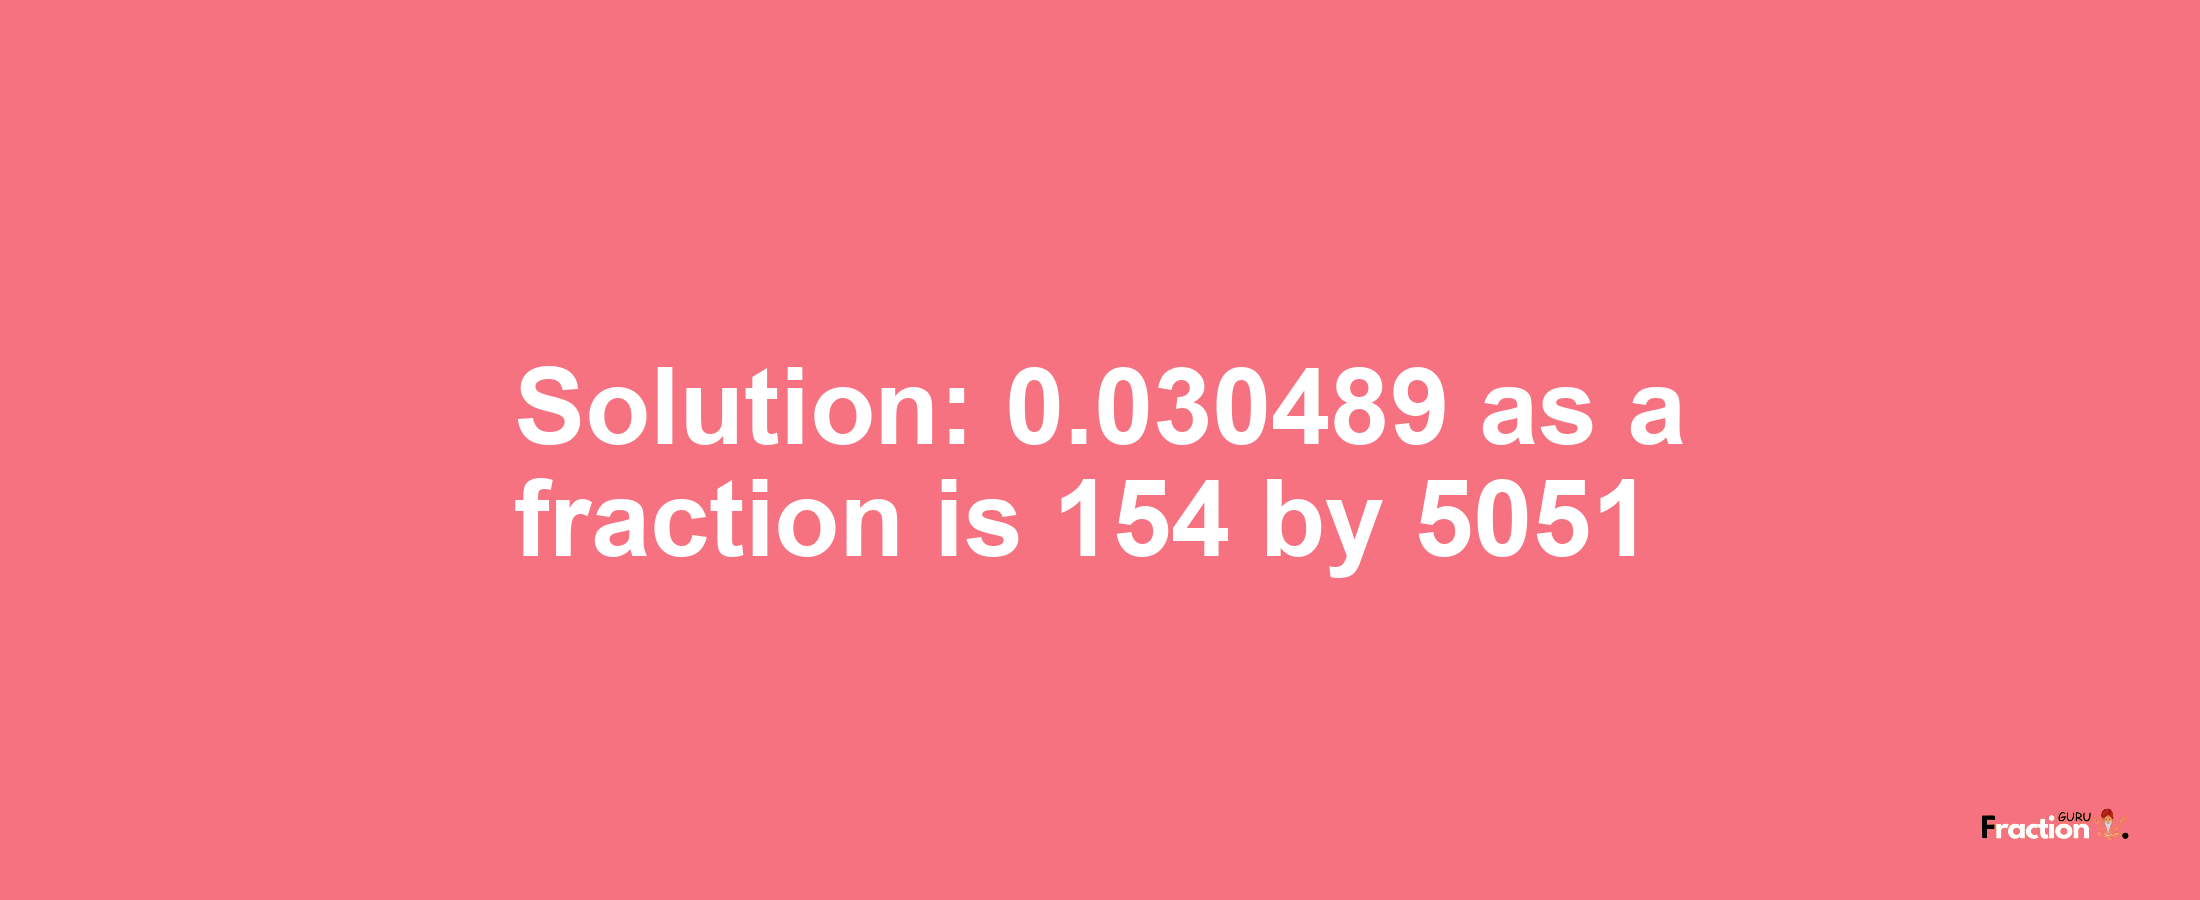 Solution:0.030489 as a fraction is 154/5051